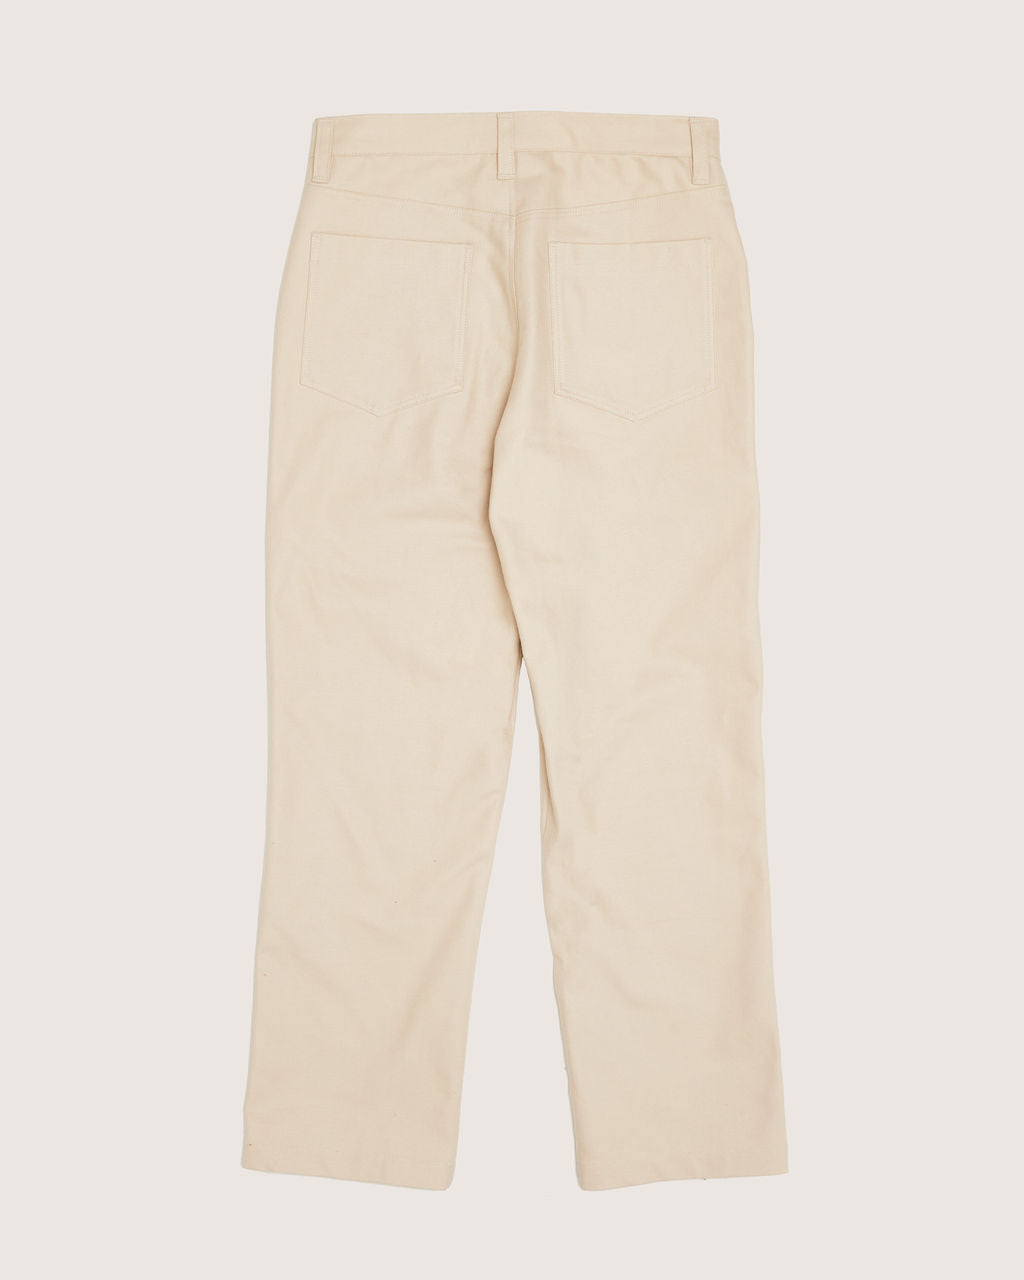 042600. 56 28. KHAKI Retail $ 60.00 Cotton Casual Pants by FULL BLUE. CARGO  TWILL PANT Whs